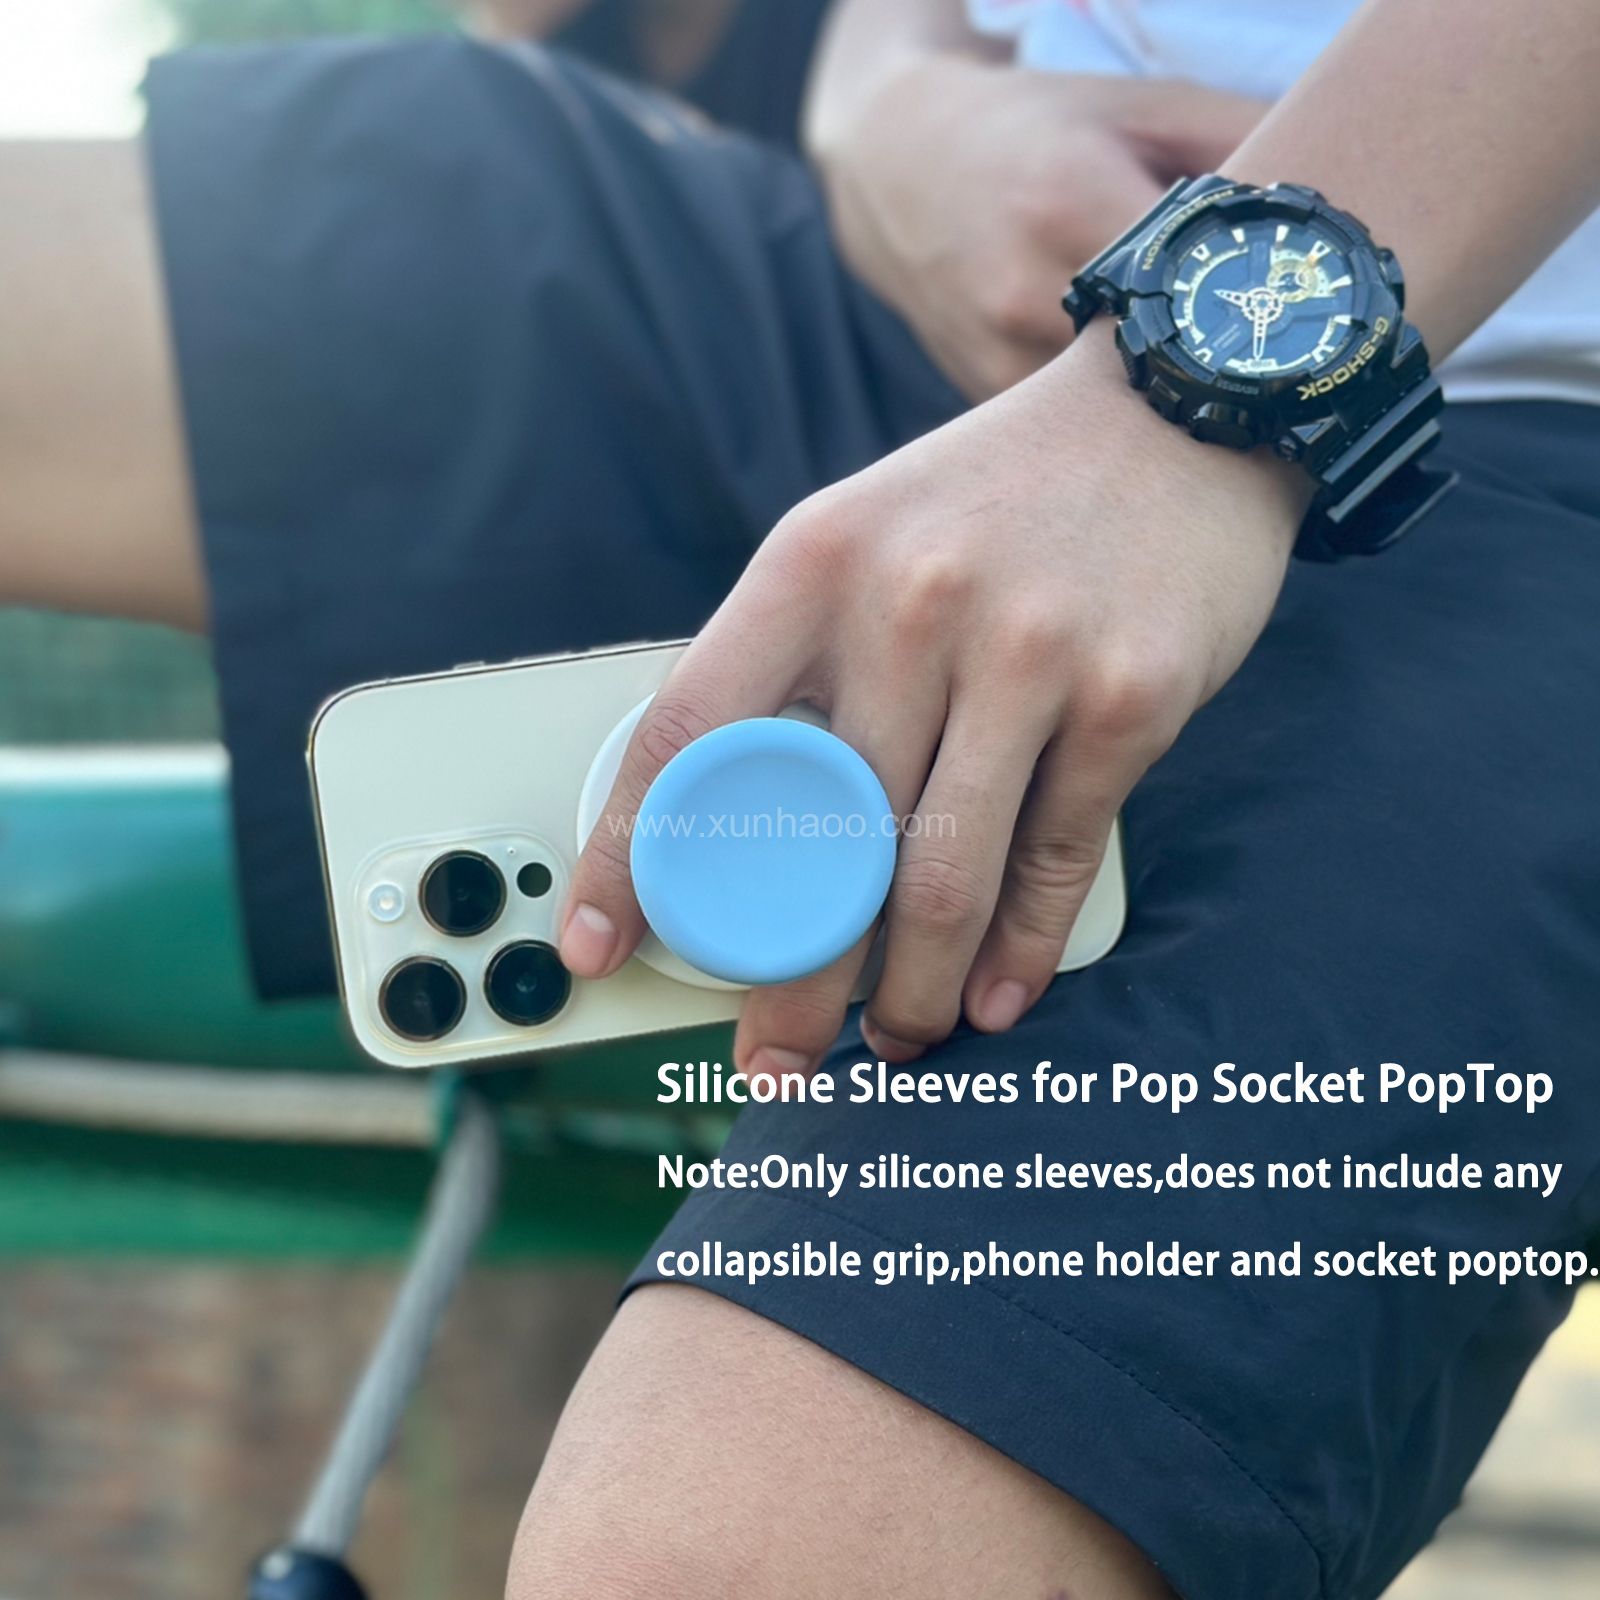 Soft Silicone Cover for Socket PopTop (Silicone Sleeves Only), Socket PopTop Silicone Sleeves for Pop Socket Phone Grips, Swappable Top Silicone Sleeves for Pop Socket Phone Wallet